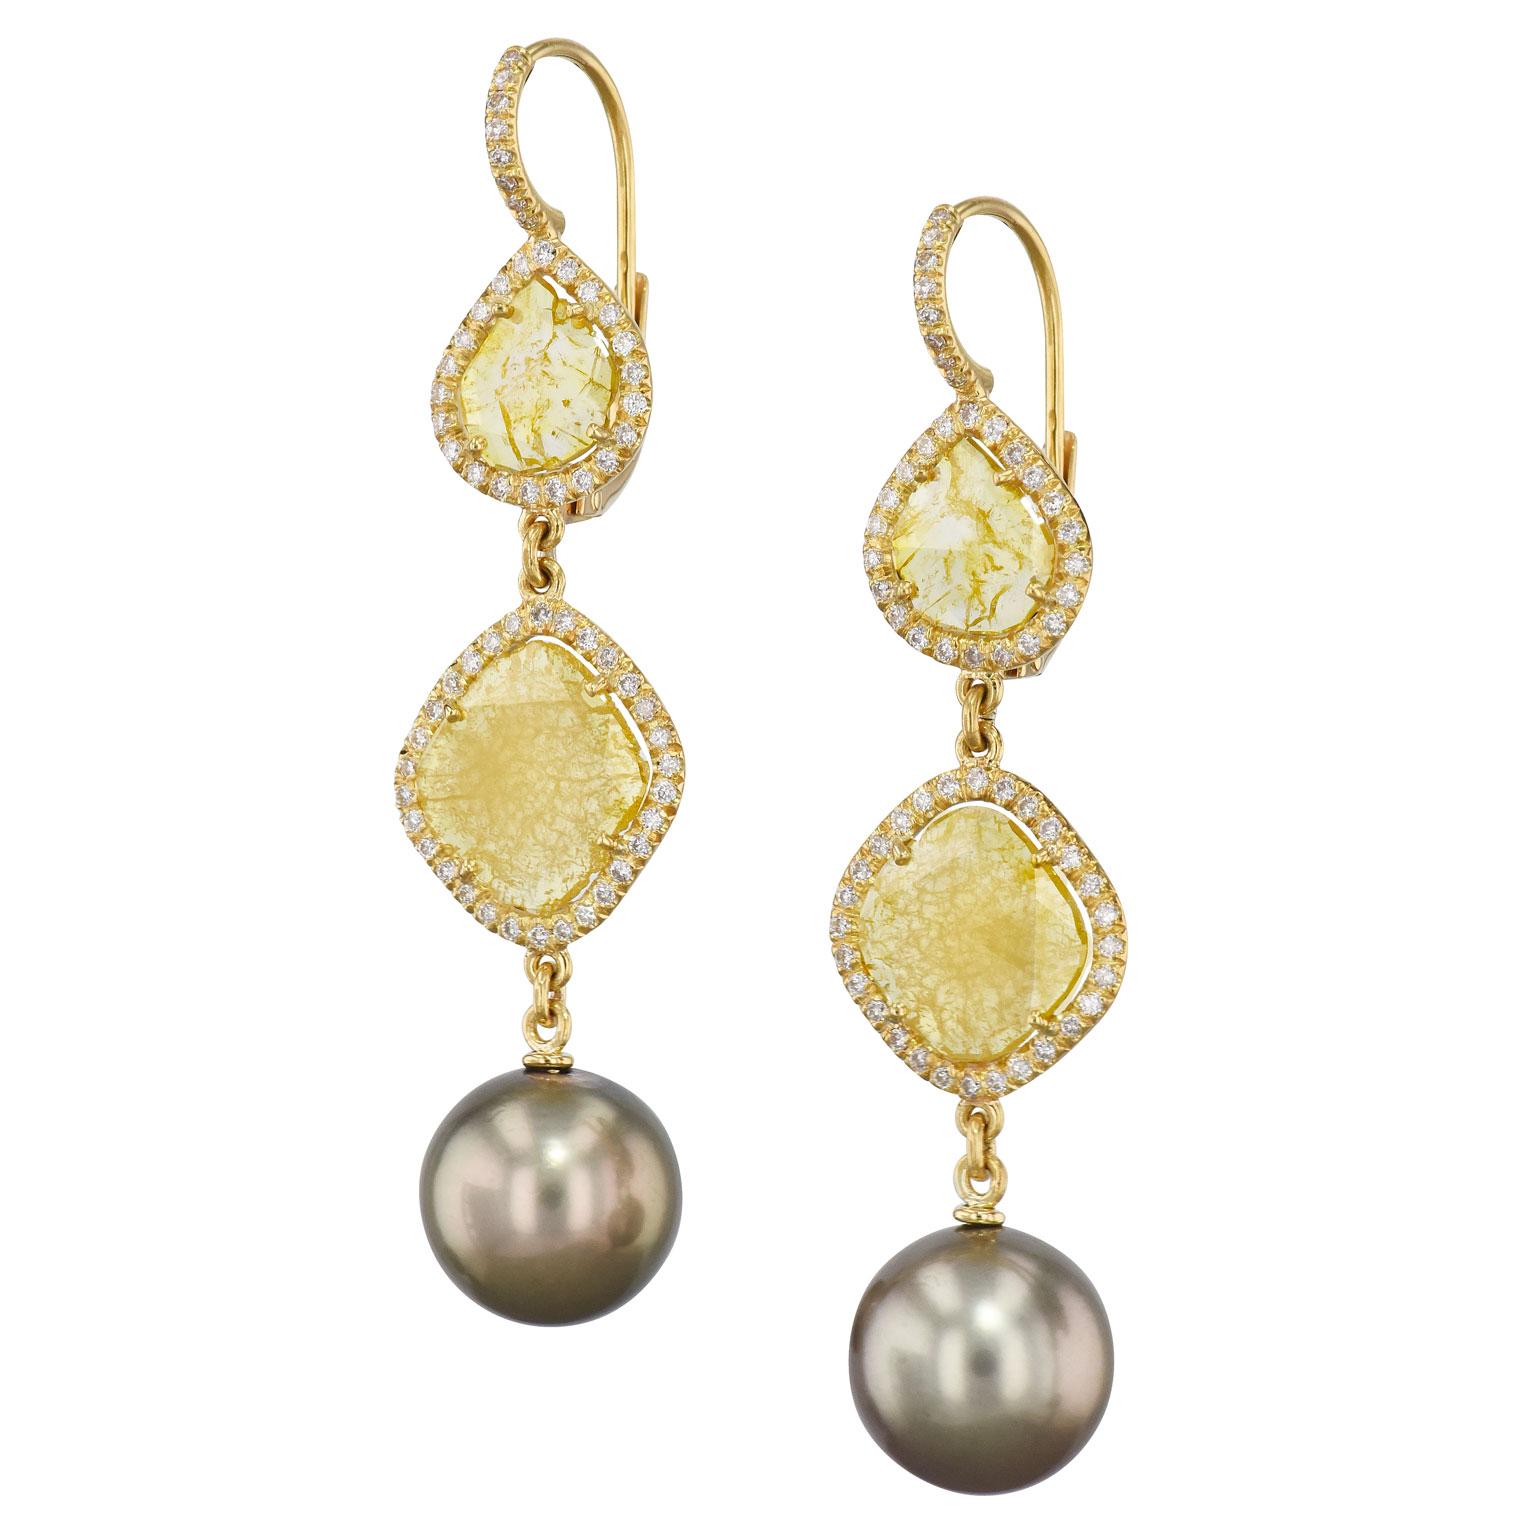 Handmade Intense Yellow Diamond Slice Earrings with Tahitian Pearls

2.49 carats of natural intense yellow diamond slices are surrounded by .59 carats of H/I colors SI1 clarity white diamonds. There are stunning Tahitian Pearls hanging at the bottom